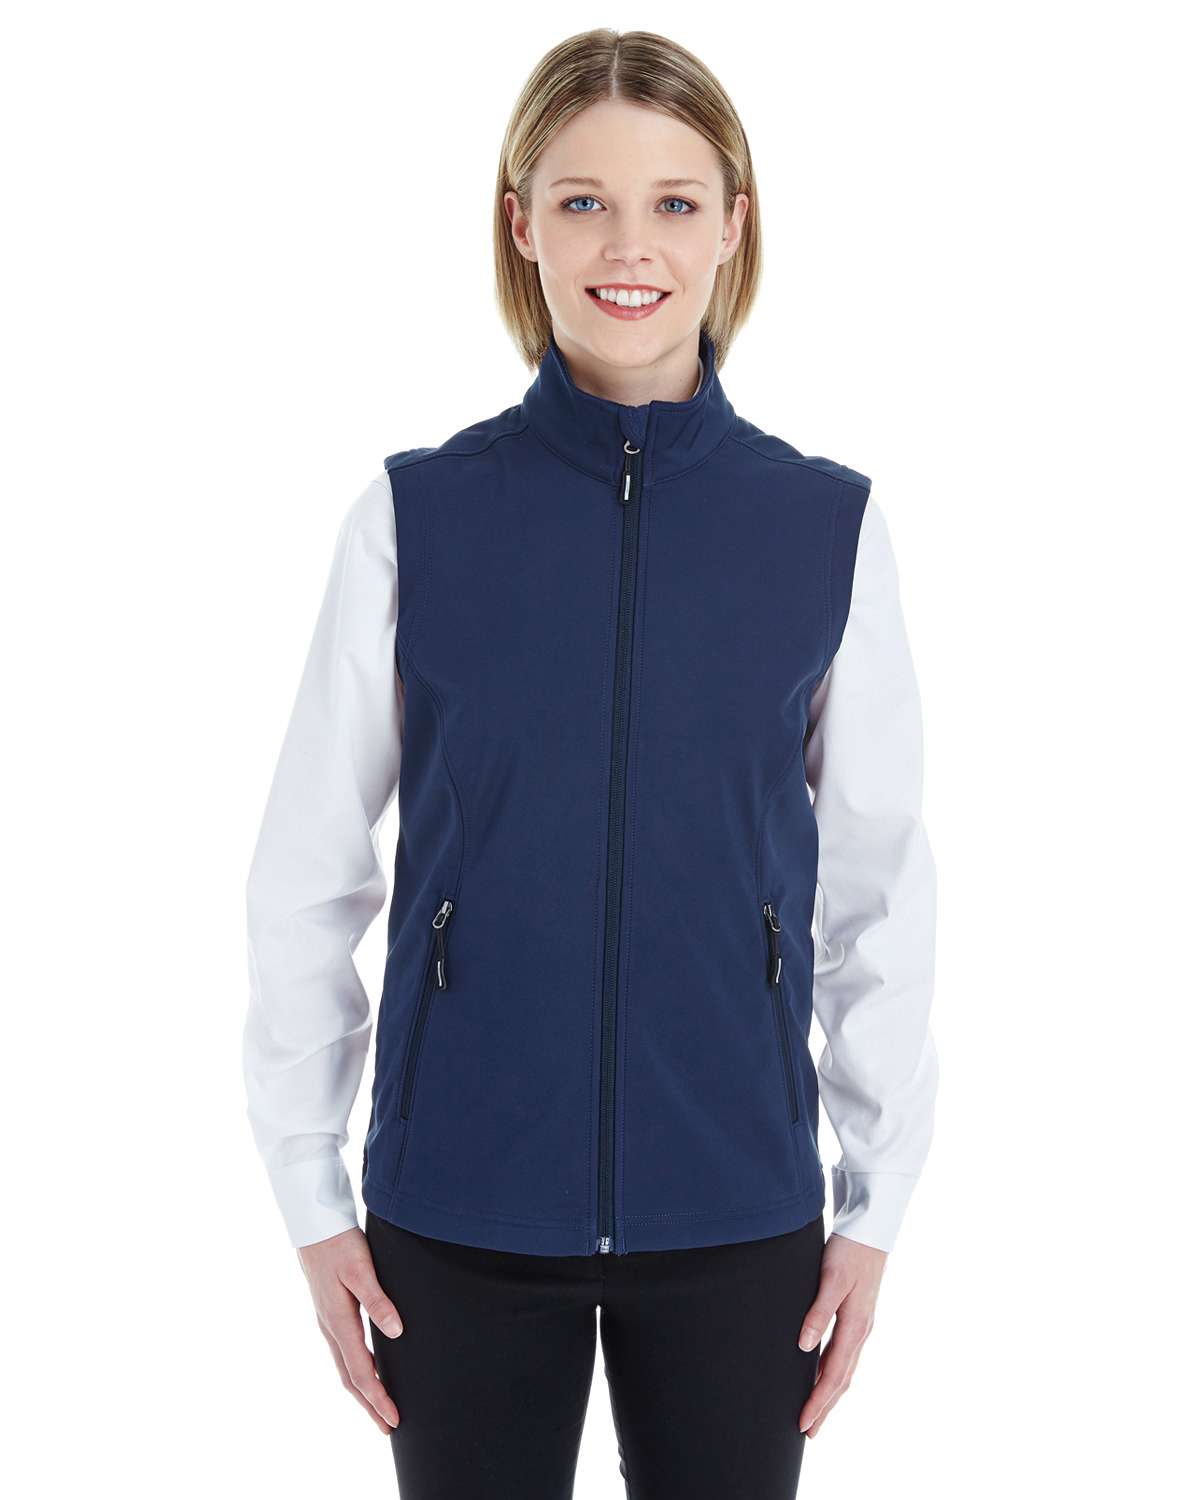 Core 365 CE701W - Ladies' Cruise Two-Layer Fleece Bonded Soft Shell Vest